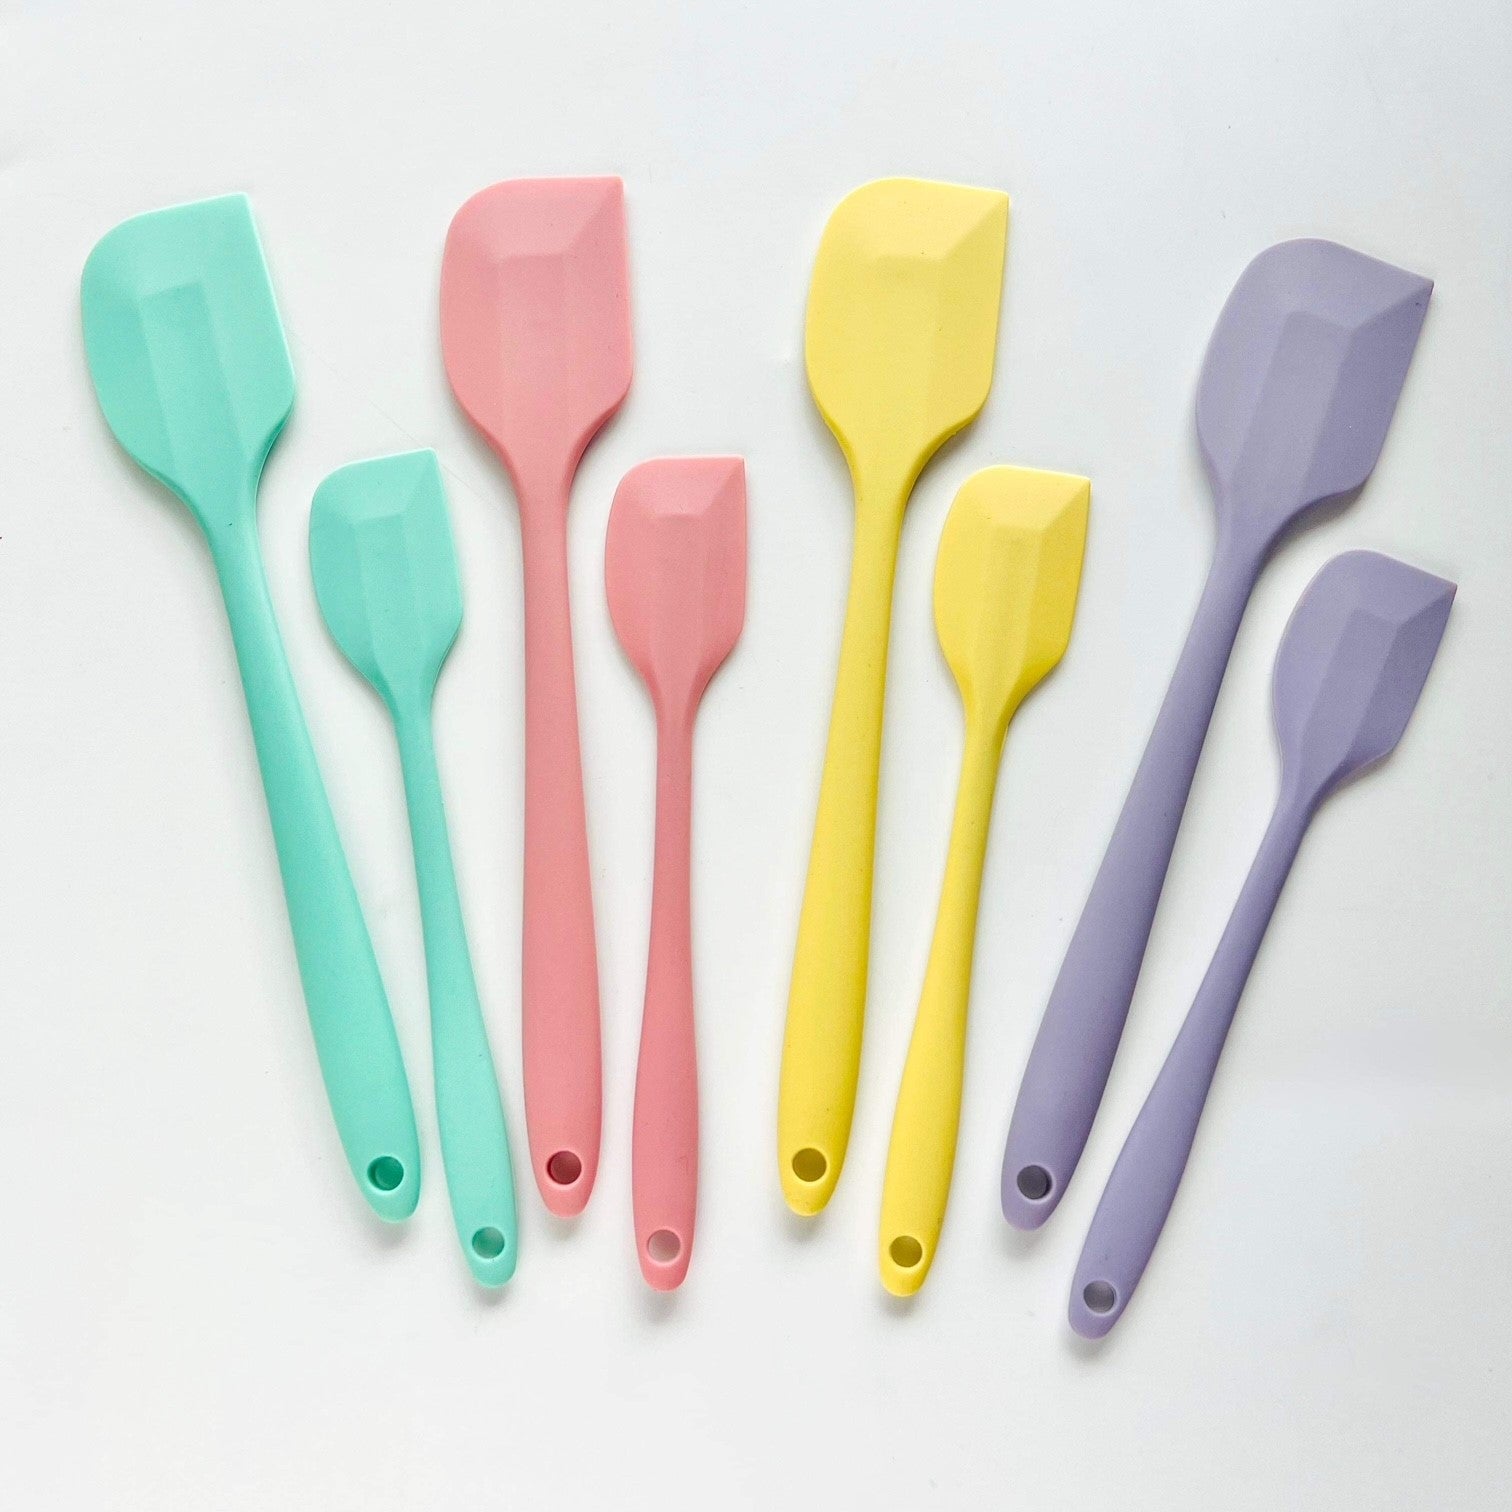 Large Silicone Spatula - Nordic Pink